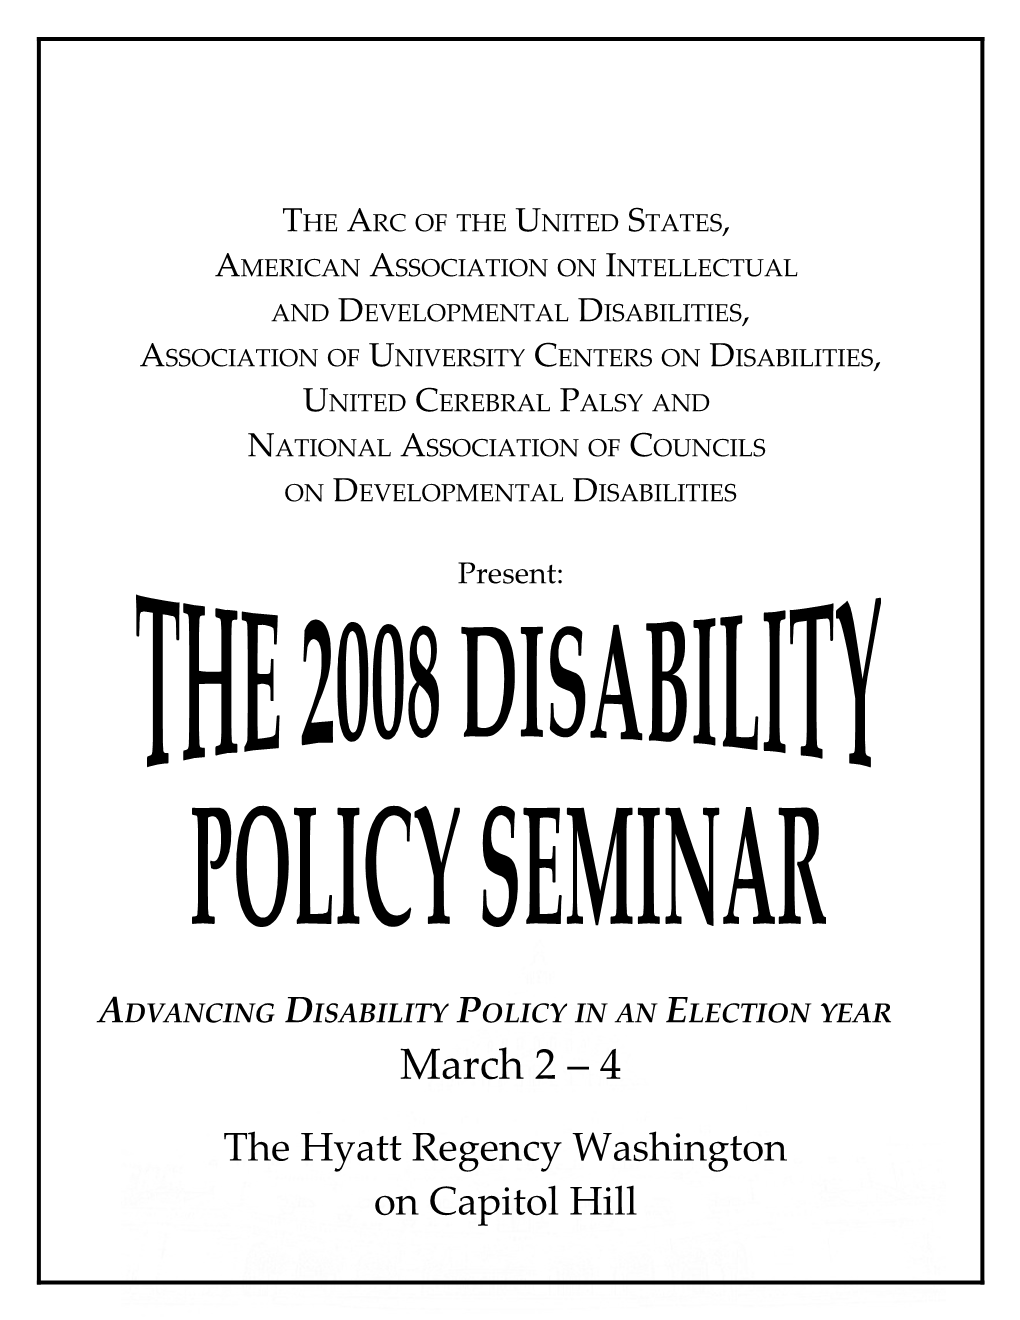 The Arc, United Cerebral Palsy, Aamr/Aaidd, Aucd, and Nacdd